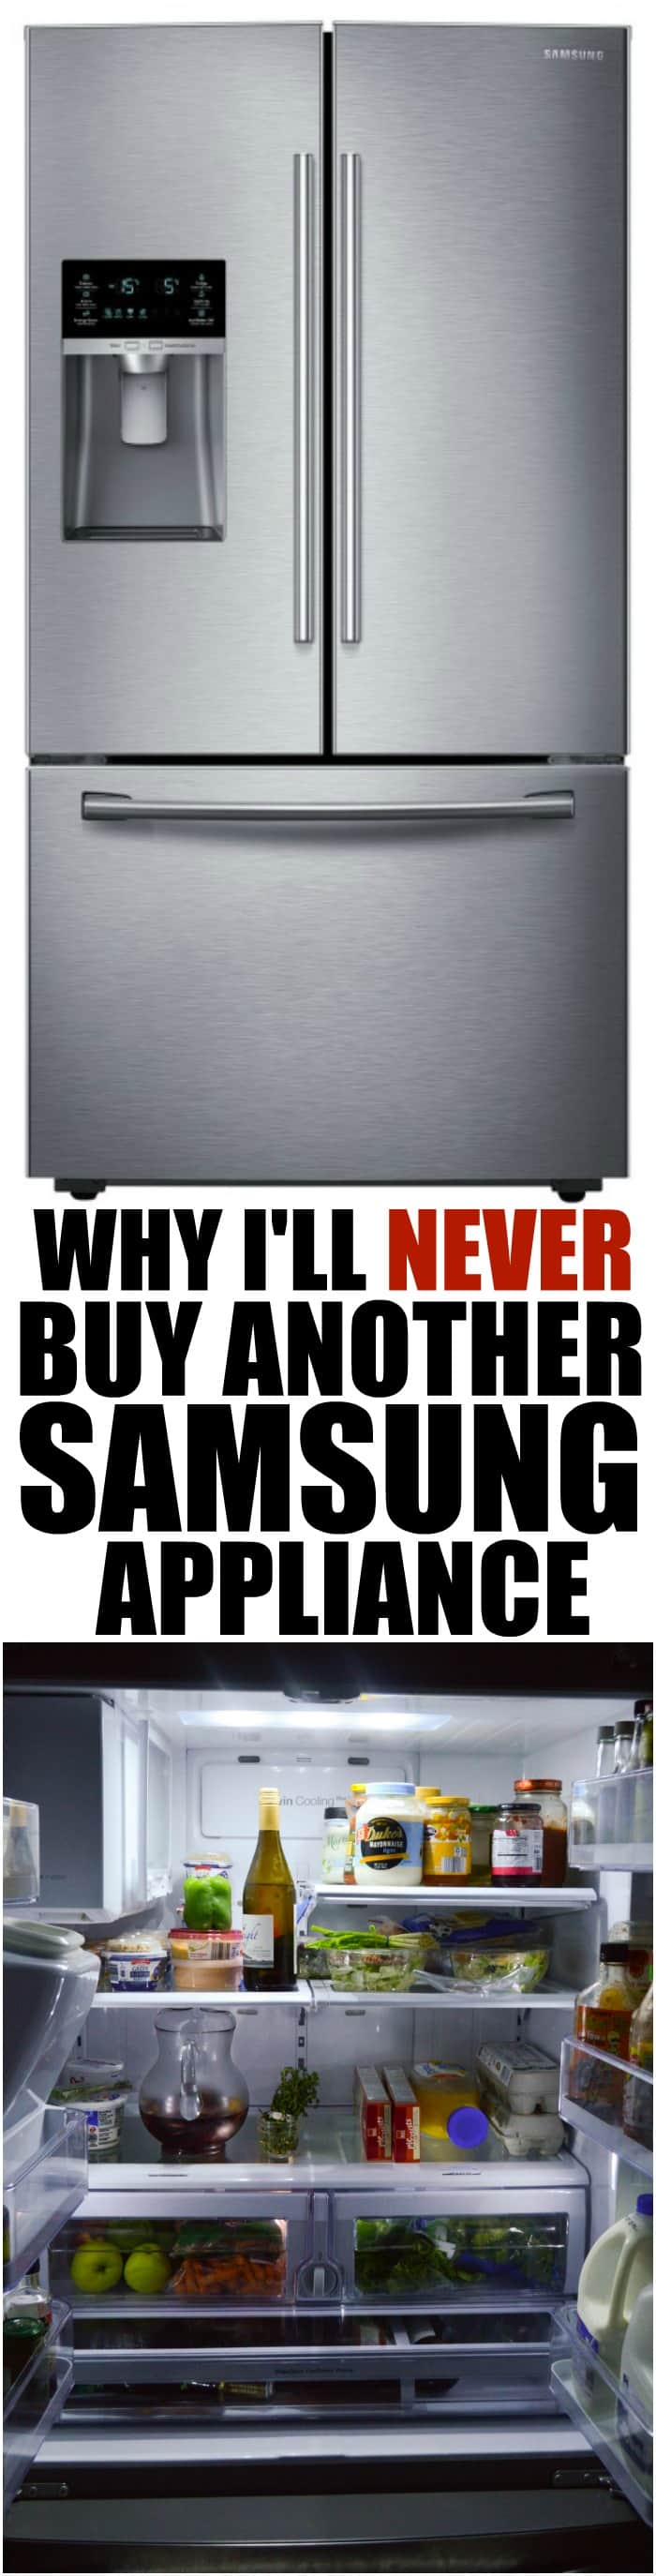 Why I'll Never Buy Another Samsung Appliance